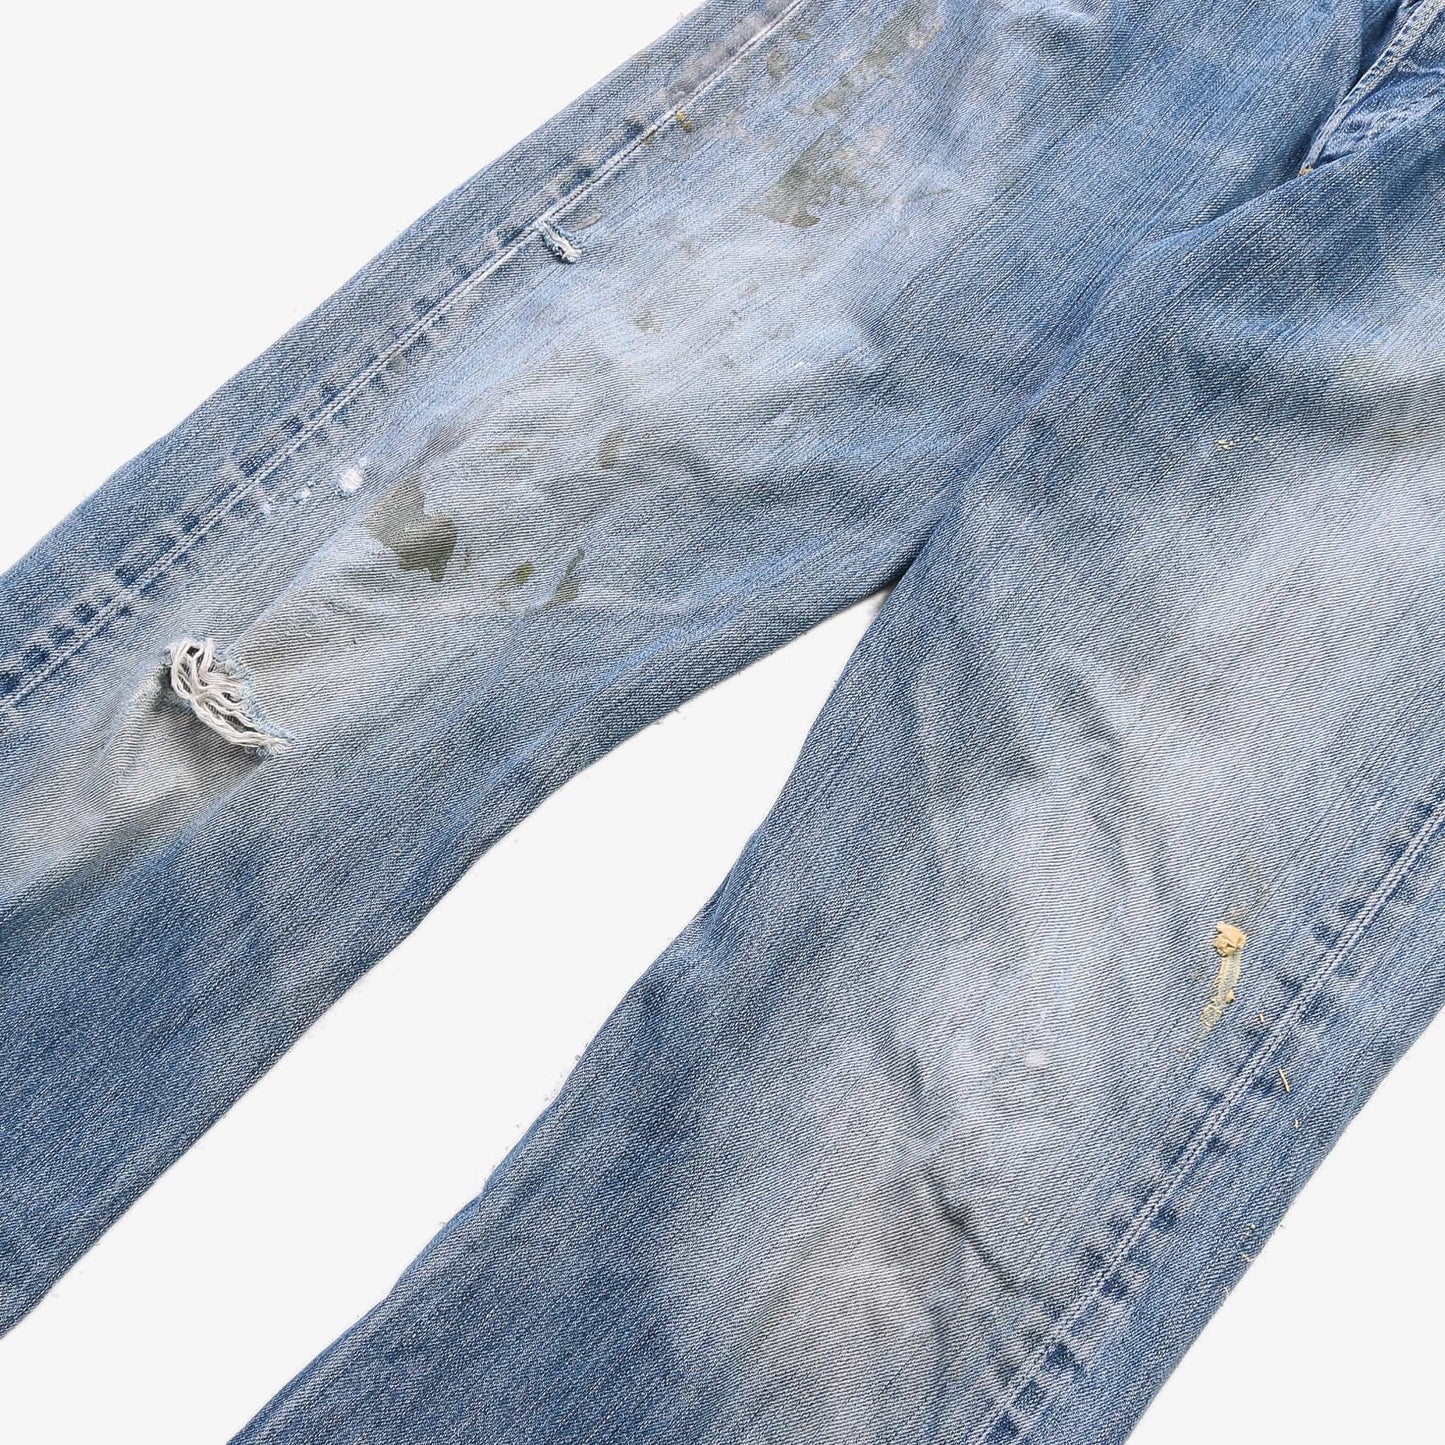 Vintage Levi's 501 Jeans - 30" 34" - American Madness